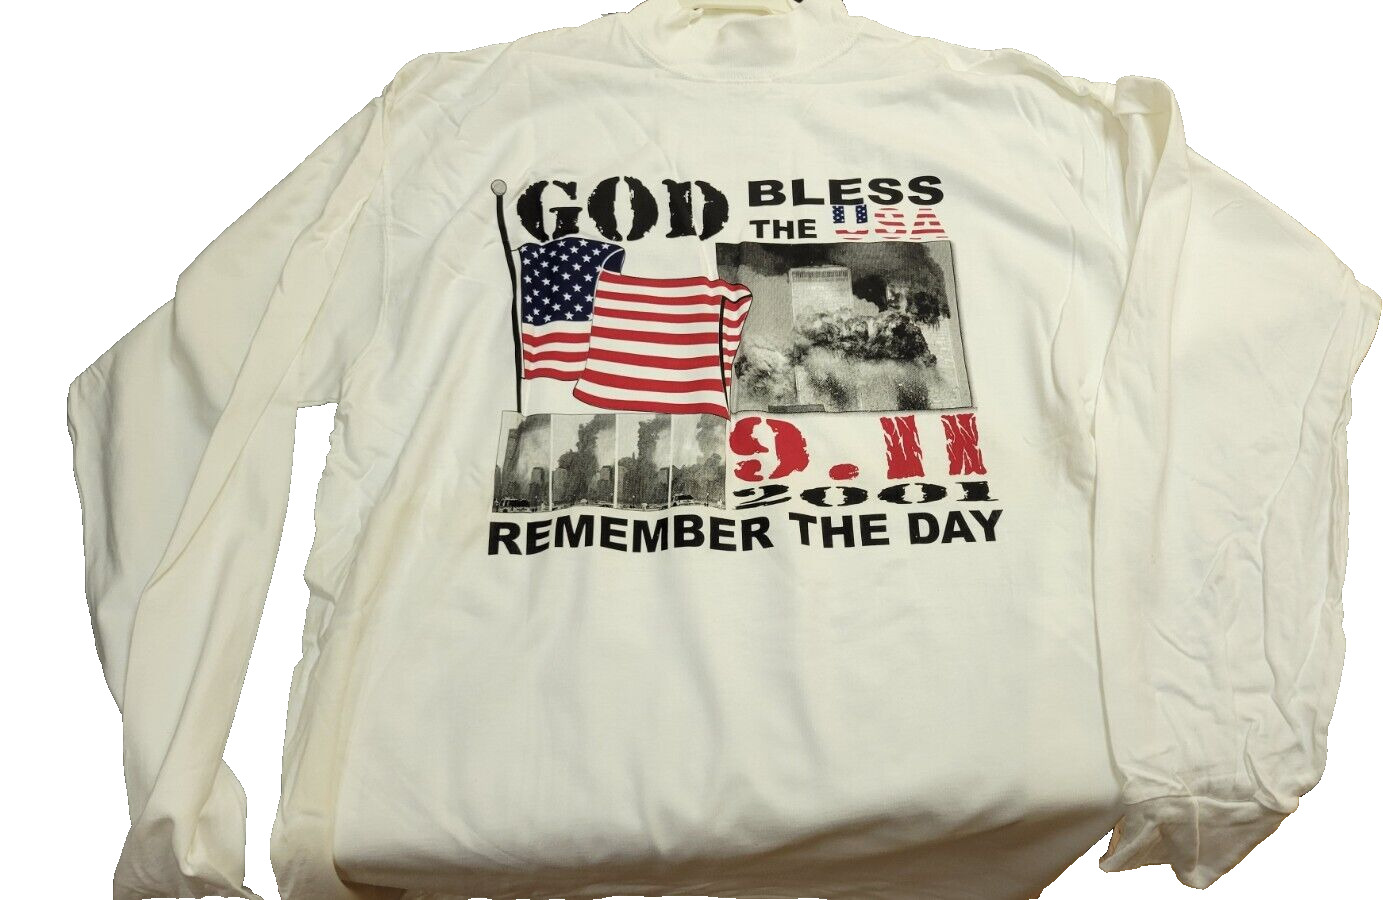 NEW Vintage Tee GOD BLESS THE USA 9 11 Remember the DAY T shirt Long Sleeve XL